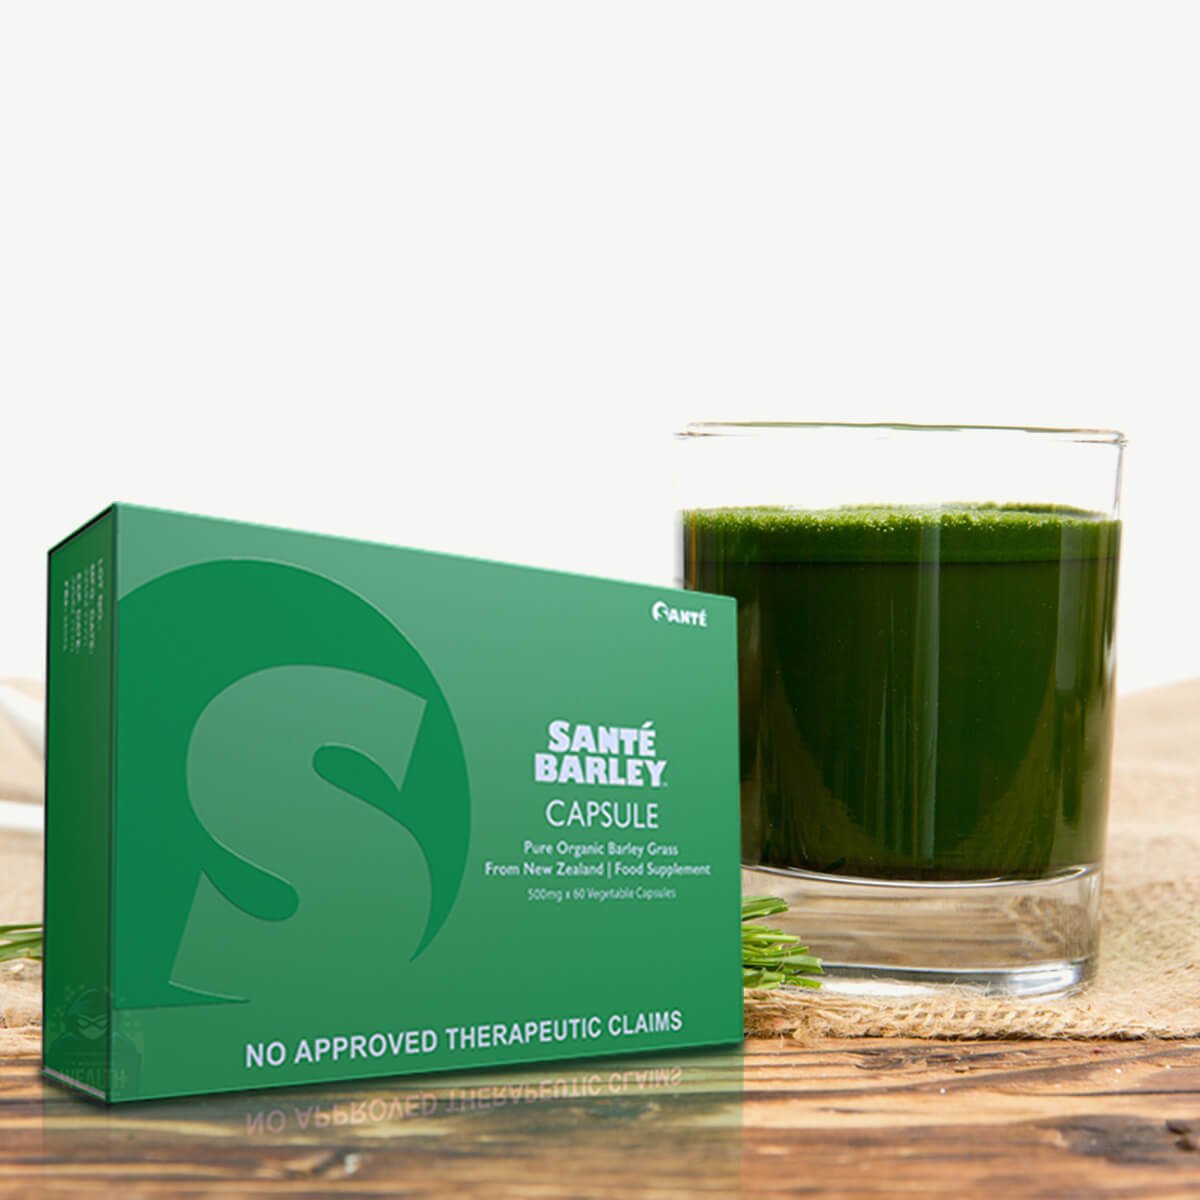 Sante Barley Pure Capsules from New Zealand (500mg x 60 capsules)